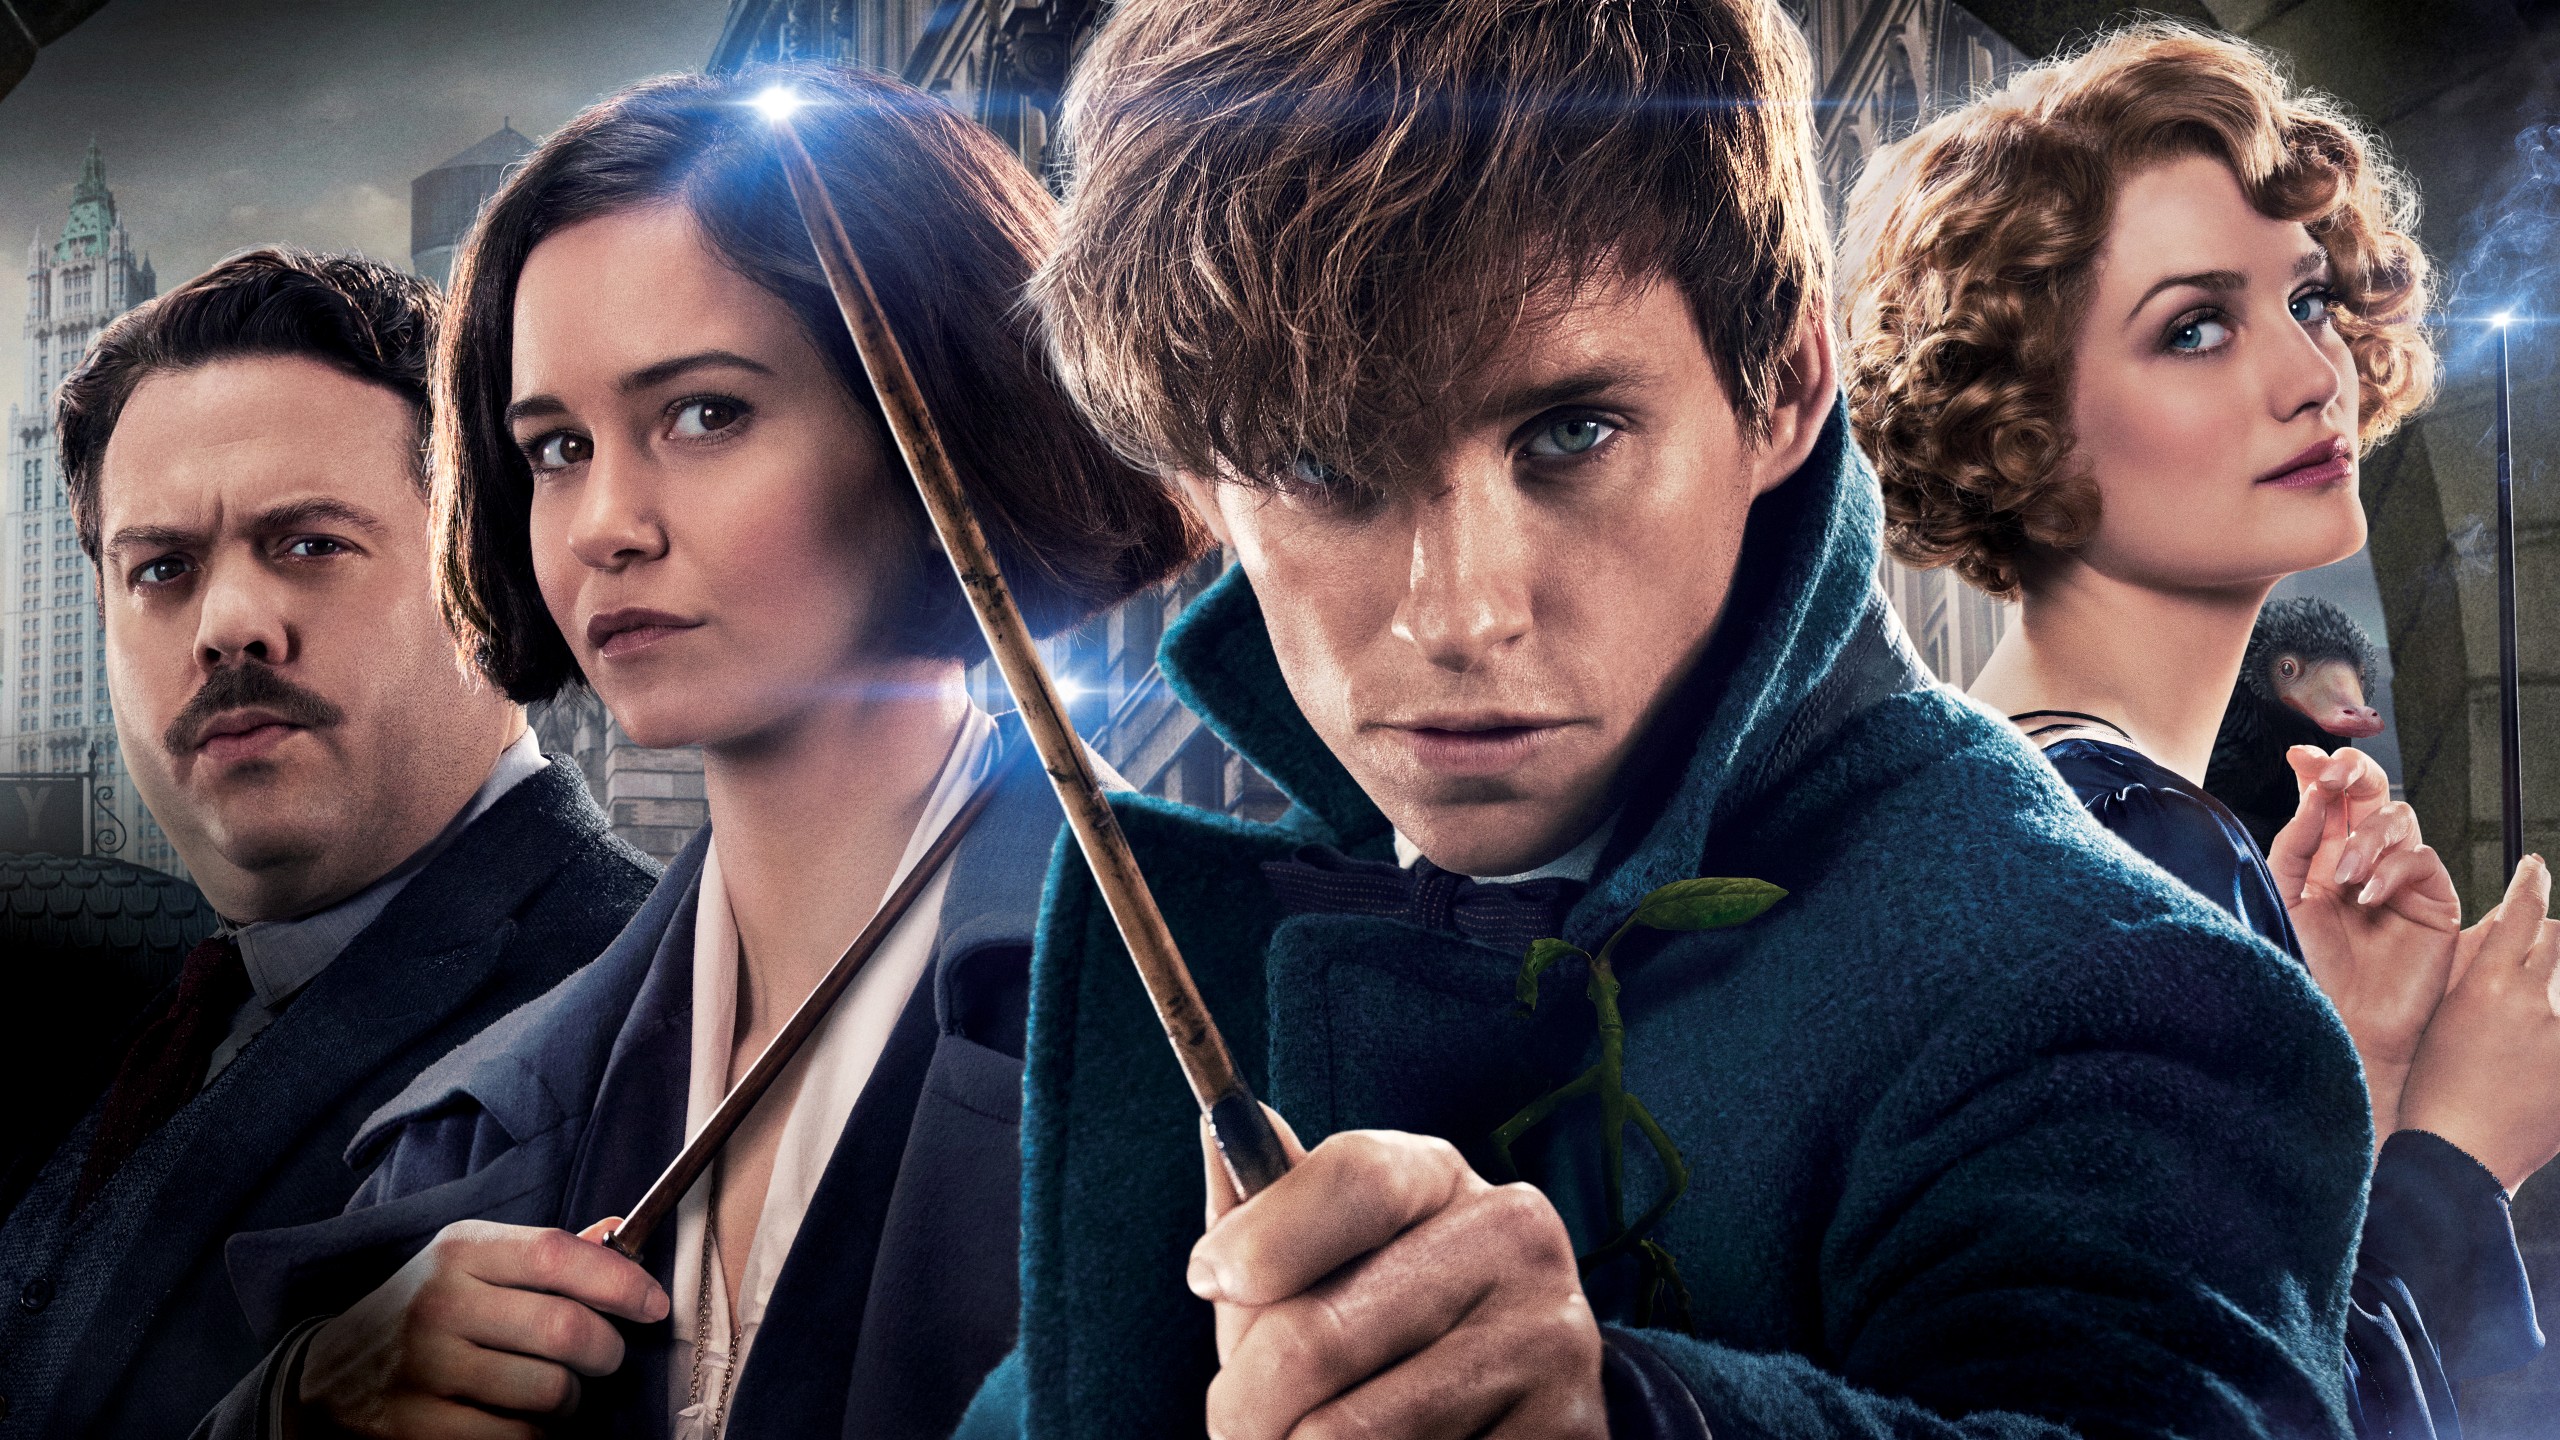 fantastic beasts wallpaper,movie,action film,fictional character